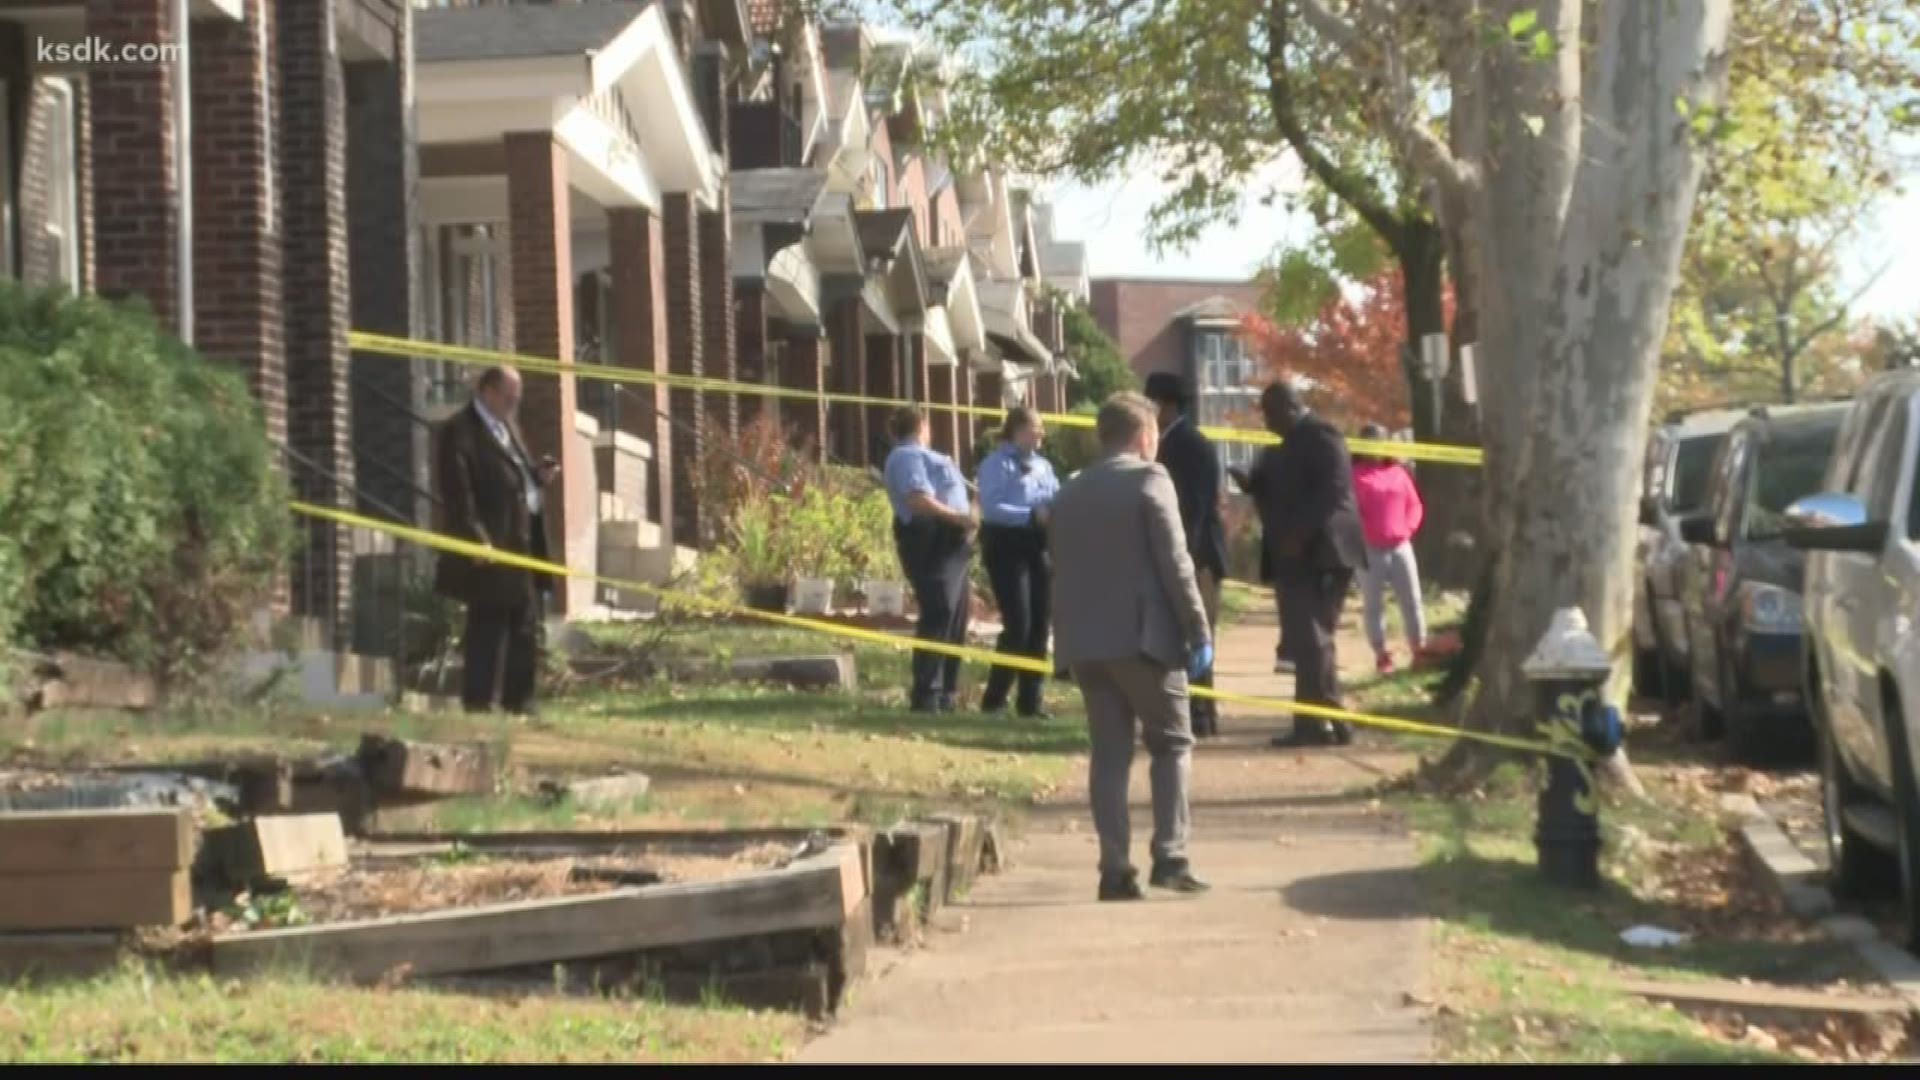 Police responded to the 3700 block of Meramec around 10:20 a.m. where a man was found with a gunshot wound.